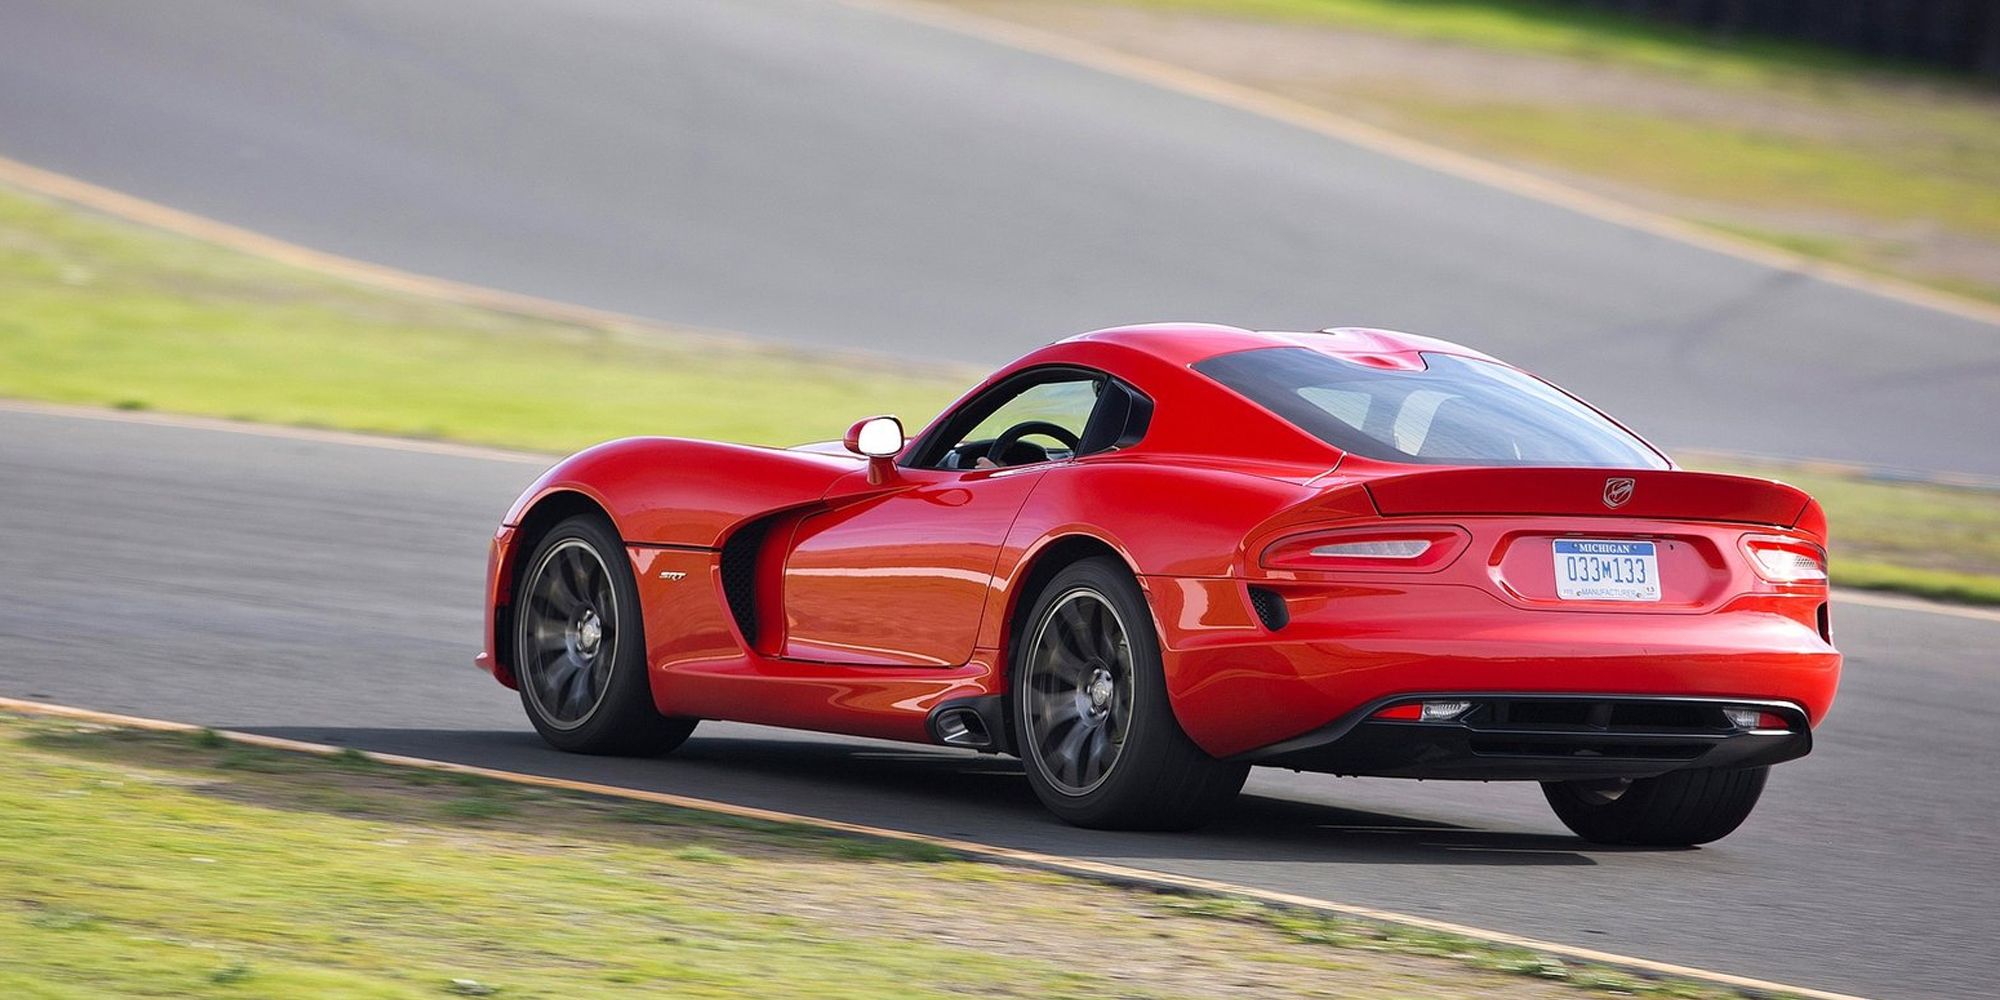 3/4 rear view of the Viper on the track